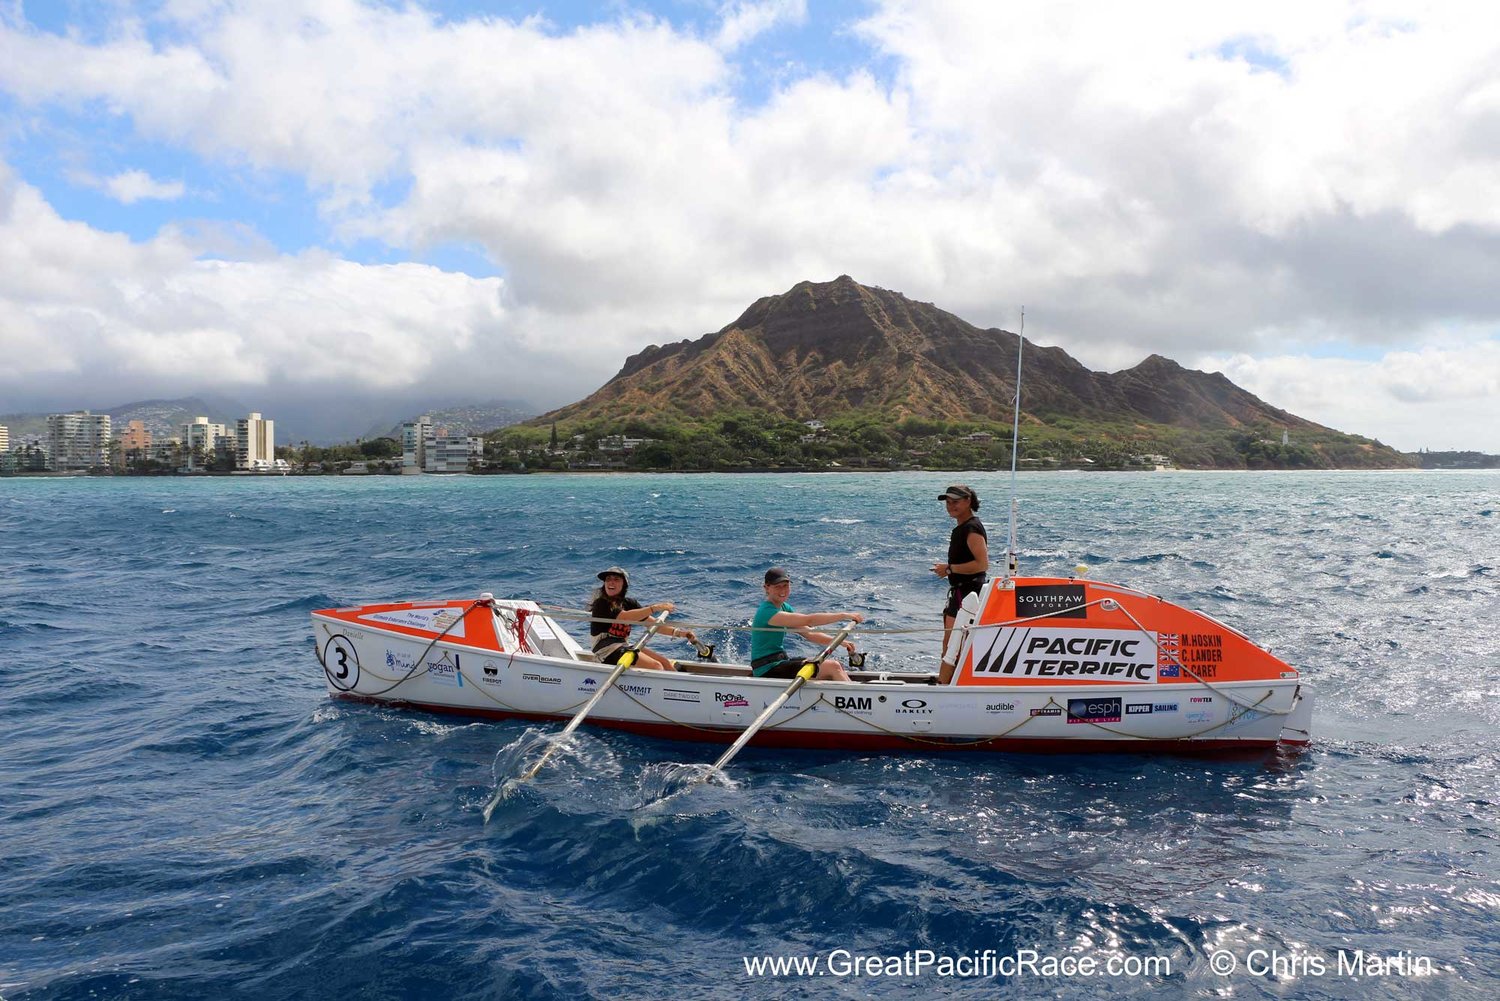 62 DAYS OF ROWING ACROSS THE PACIFIC OCEAN; INTERVIEW WITH TEAM “PACIFIC TERRIFIC”